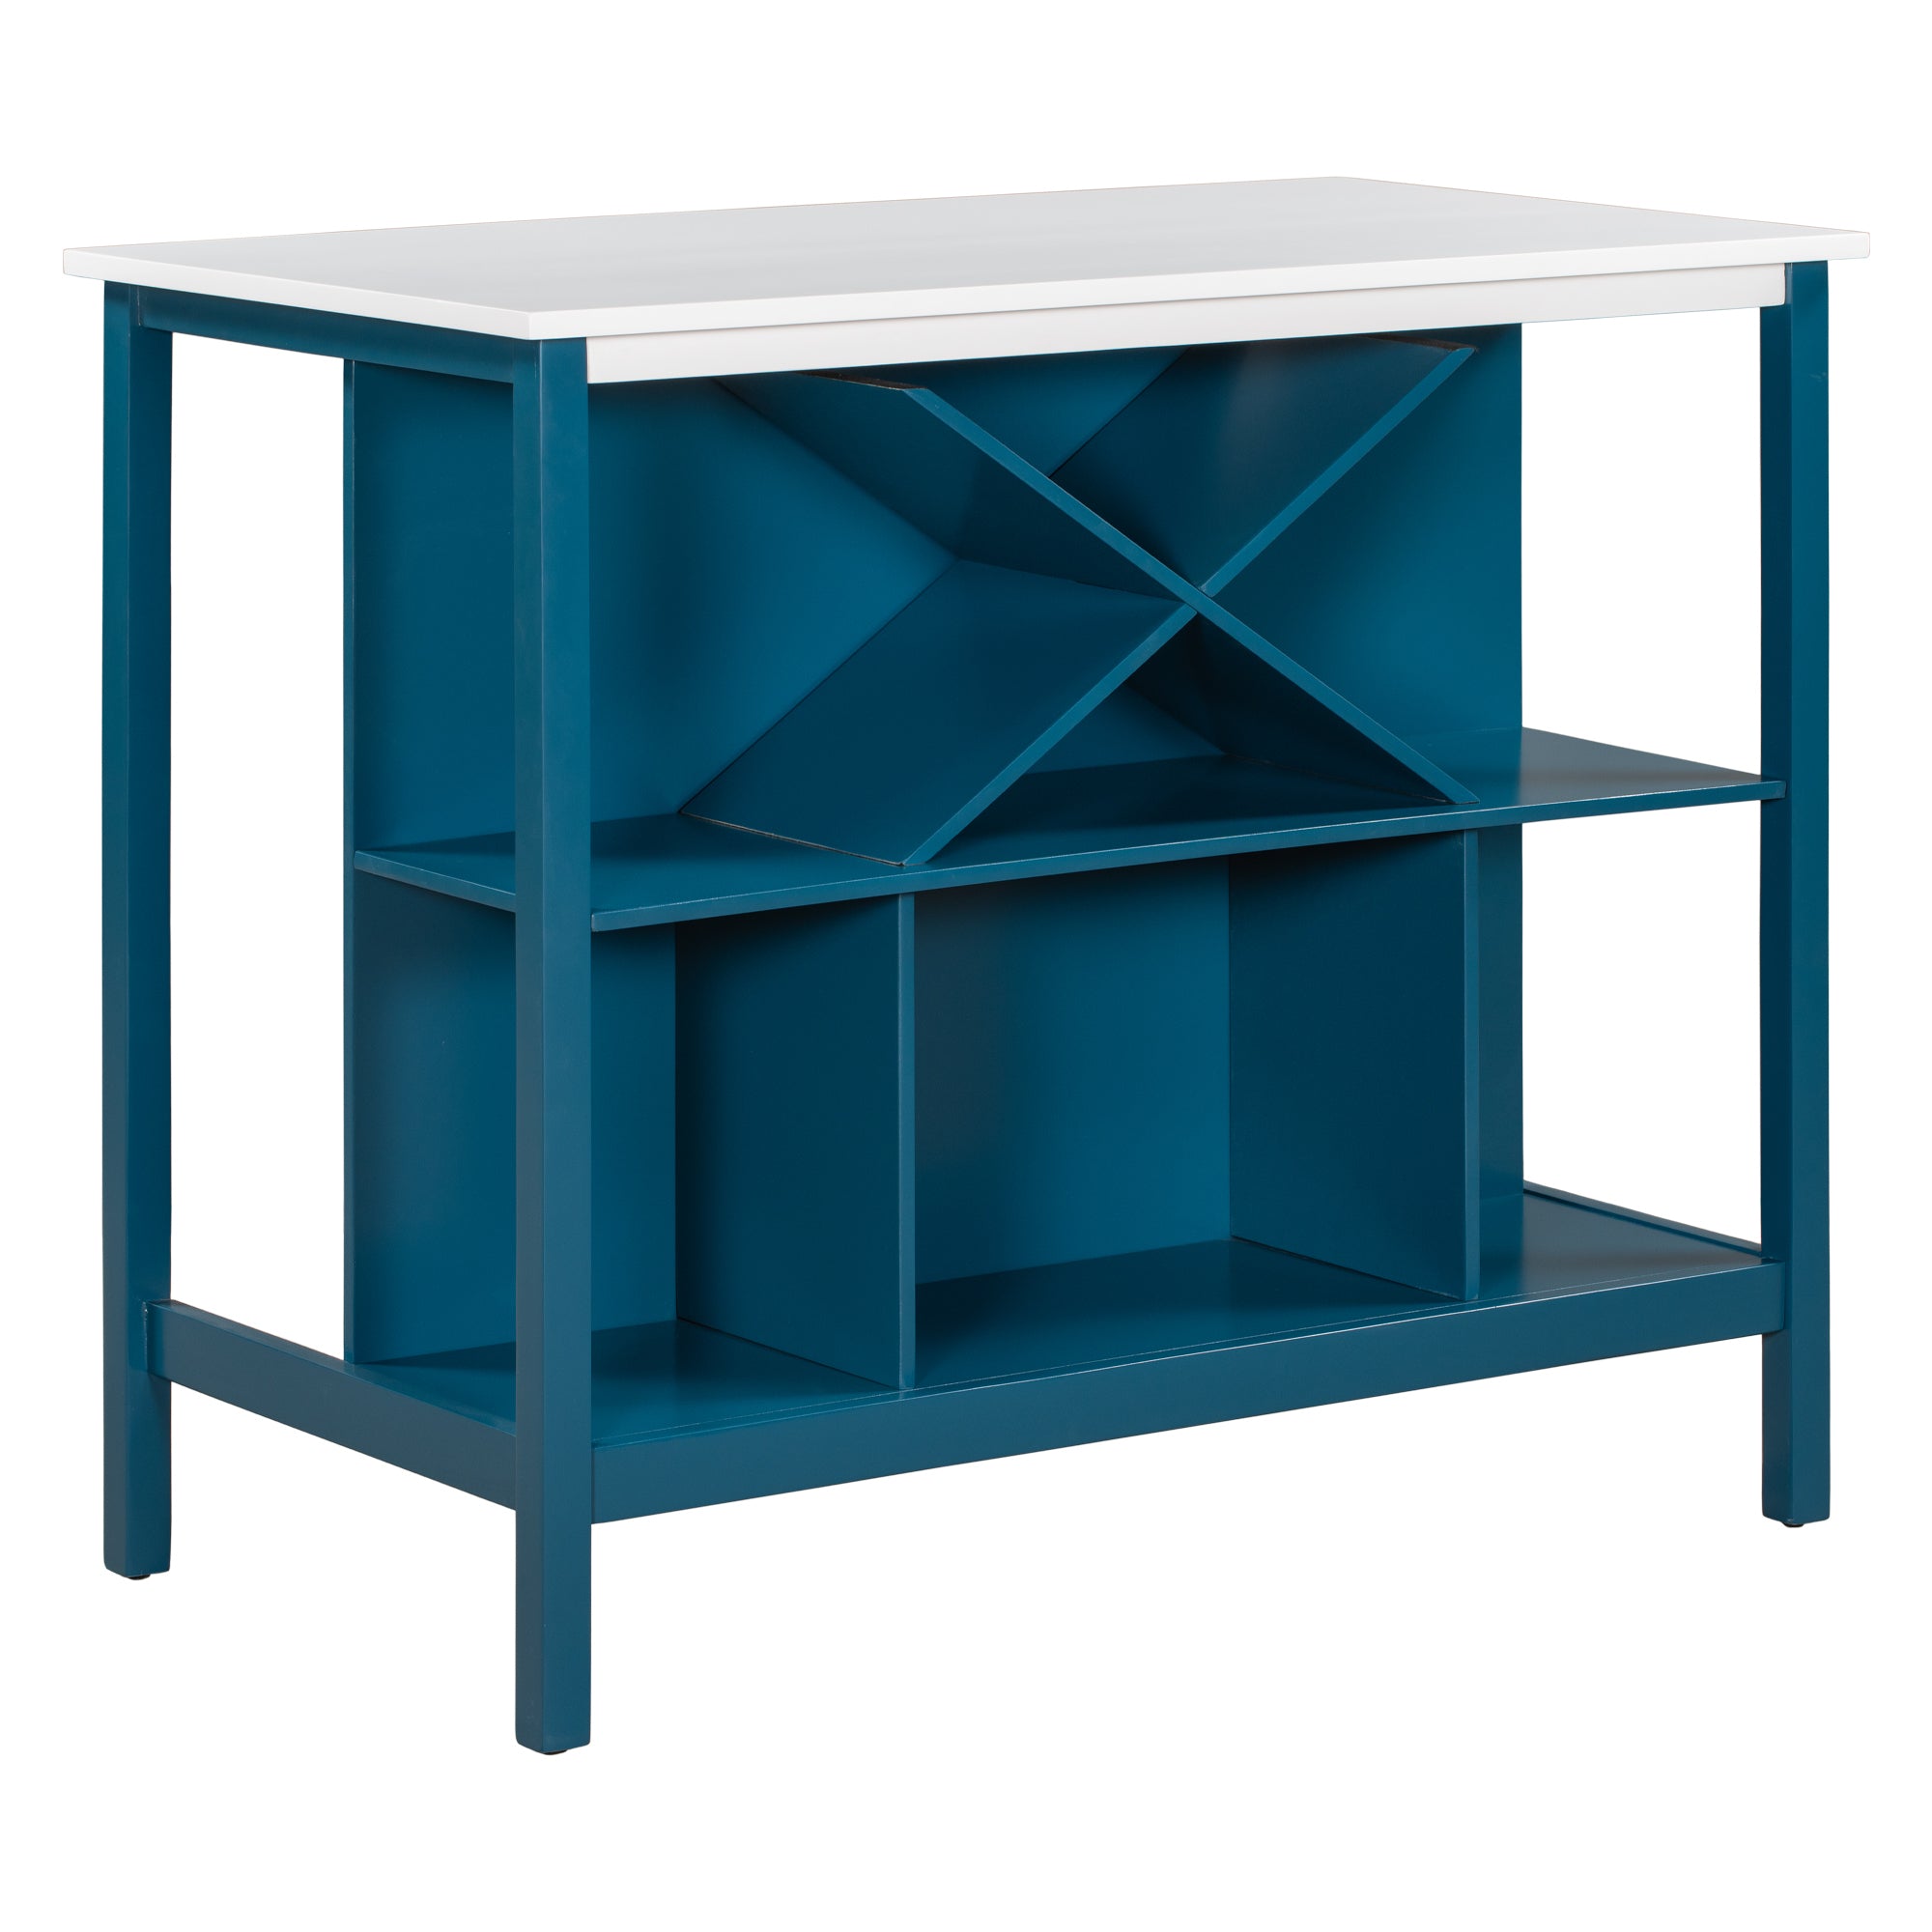 TOPMAX Wooden Dining Table (Blue Frame + White Countertop)